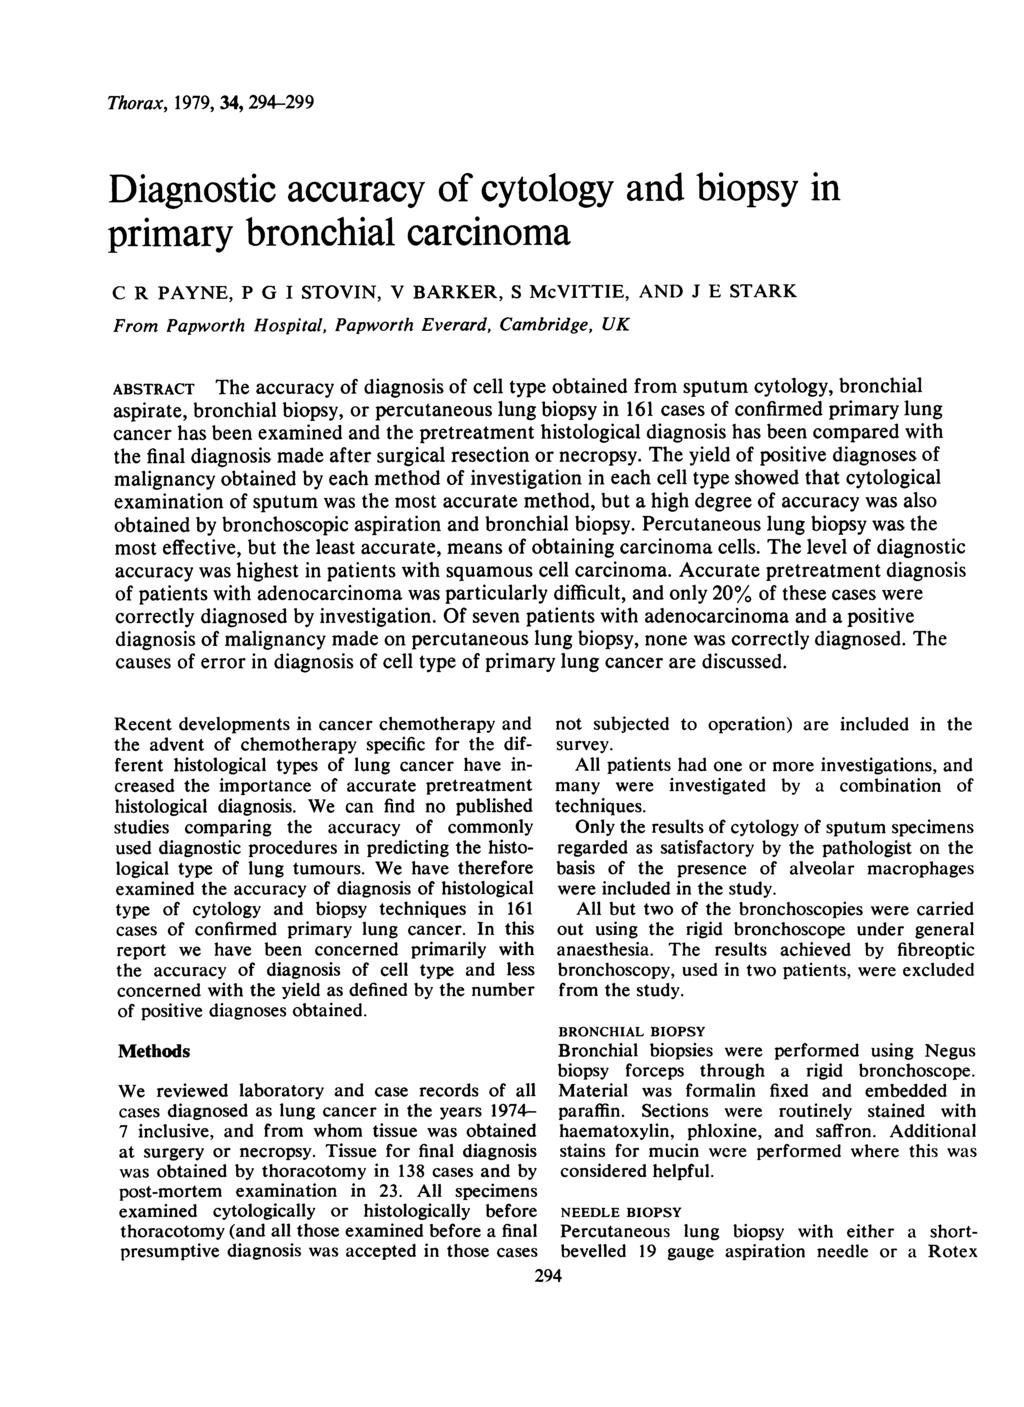 Thorax, 1979, 34, 294-299 Diagnostic accuracy of cytology and biopsy in primary bronchial carcinoma C R PAYNE, P G I STOVIN, V BARKER, S McVITTIE, AND J E STARK From Papworth Hospital, Papworth